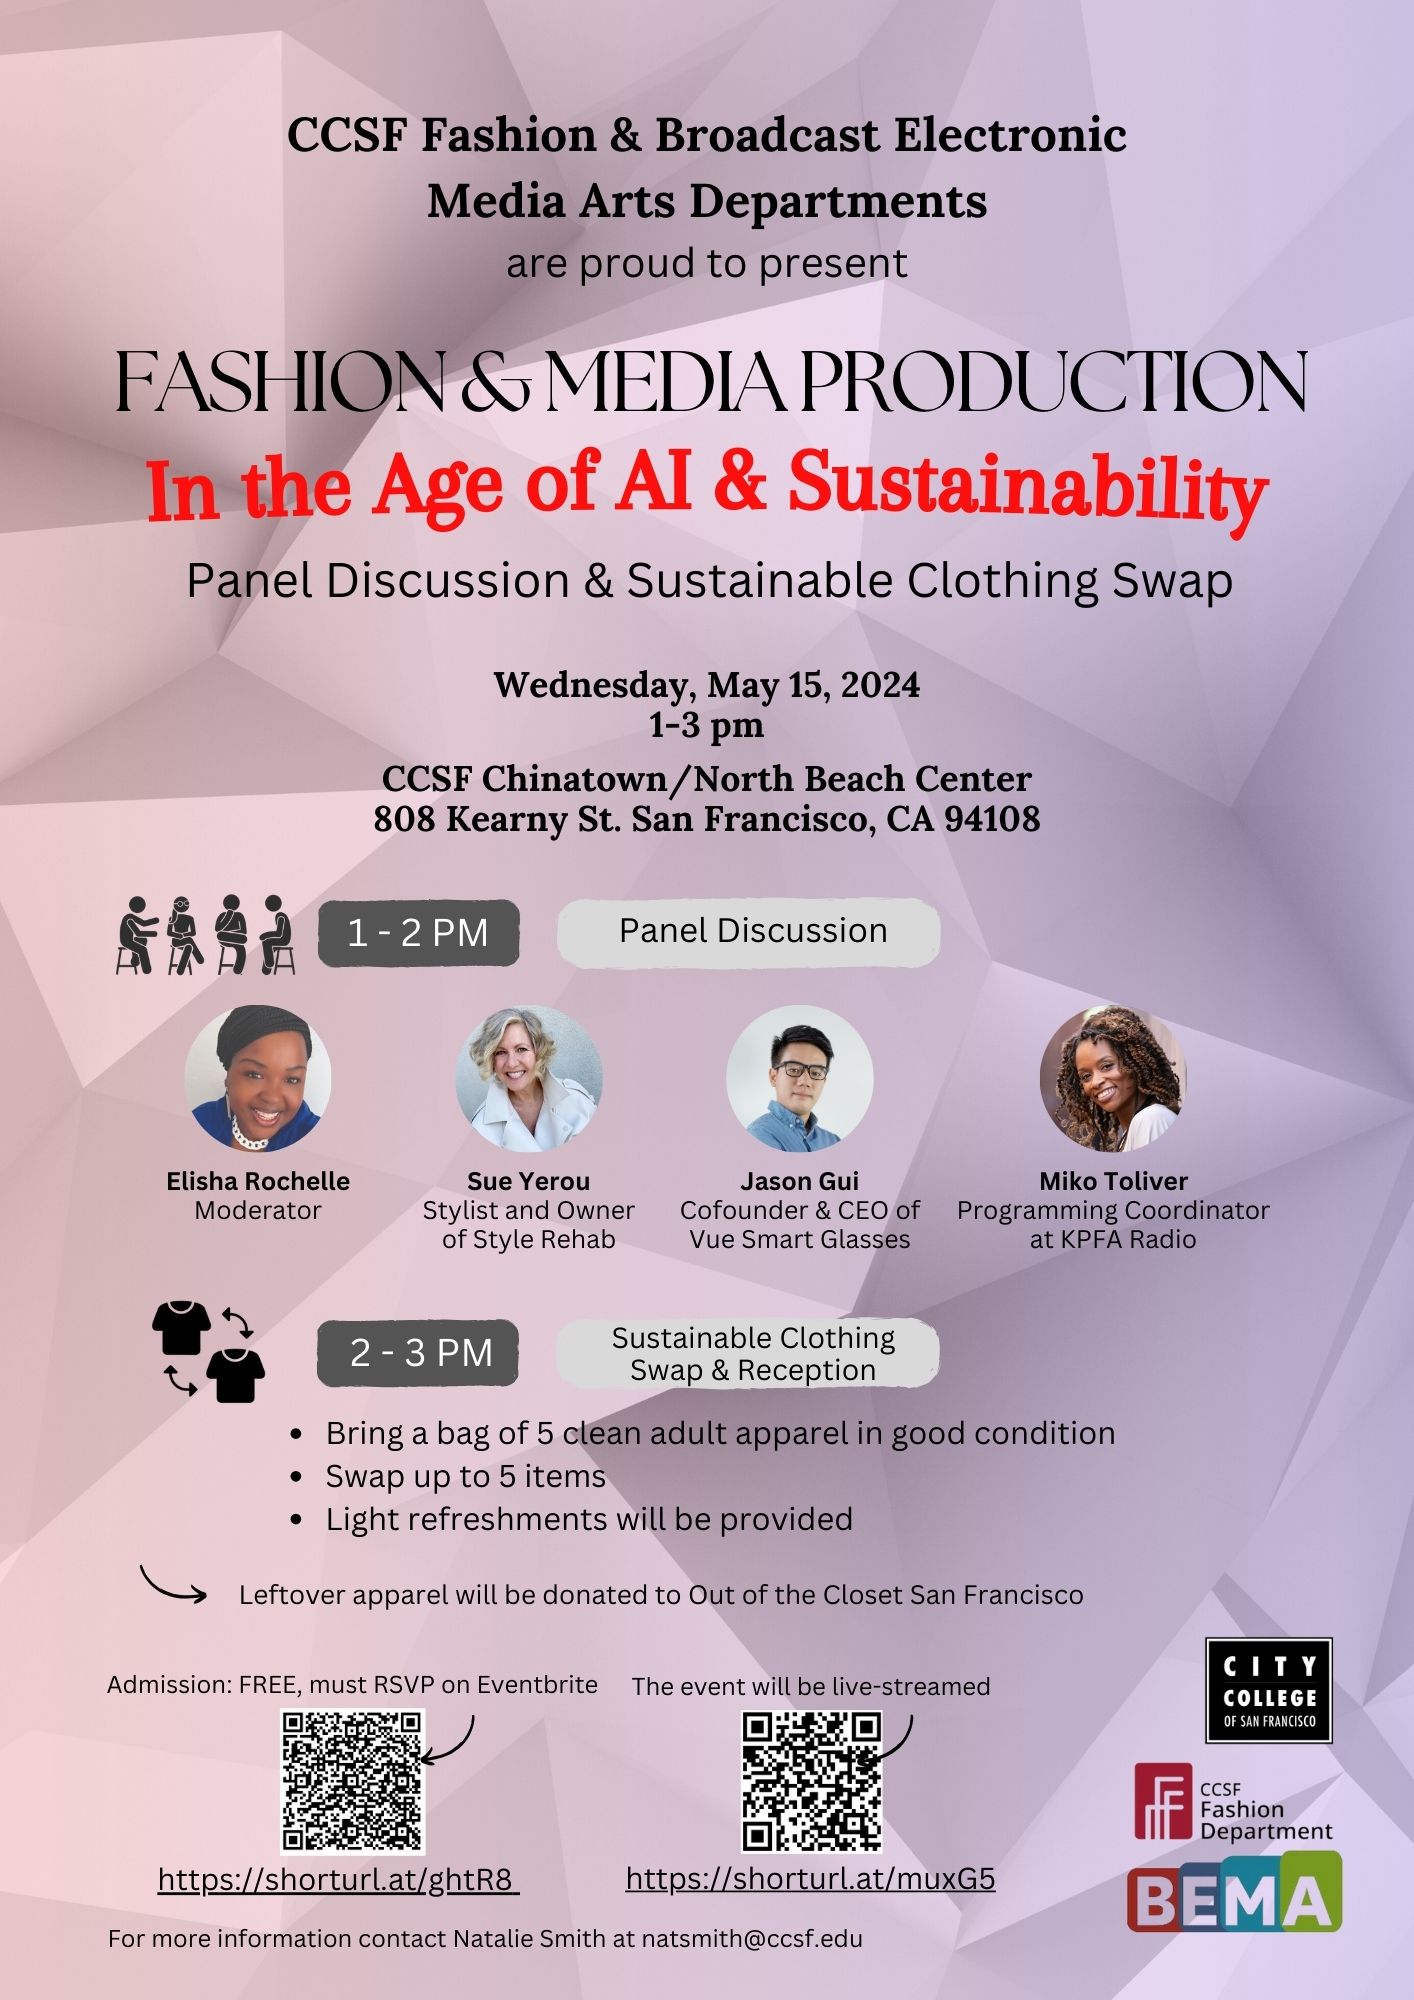 CCSF Fashion & Broadcast Electronic Media Arts Departments - In the Age of AI & Sustainability Panel Discussion & Sustainable Clothing Swap